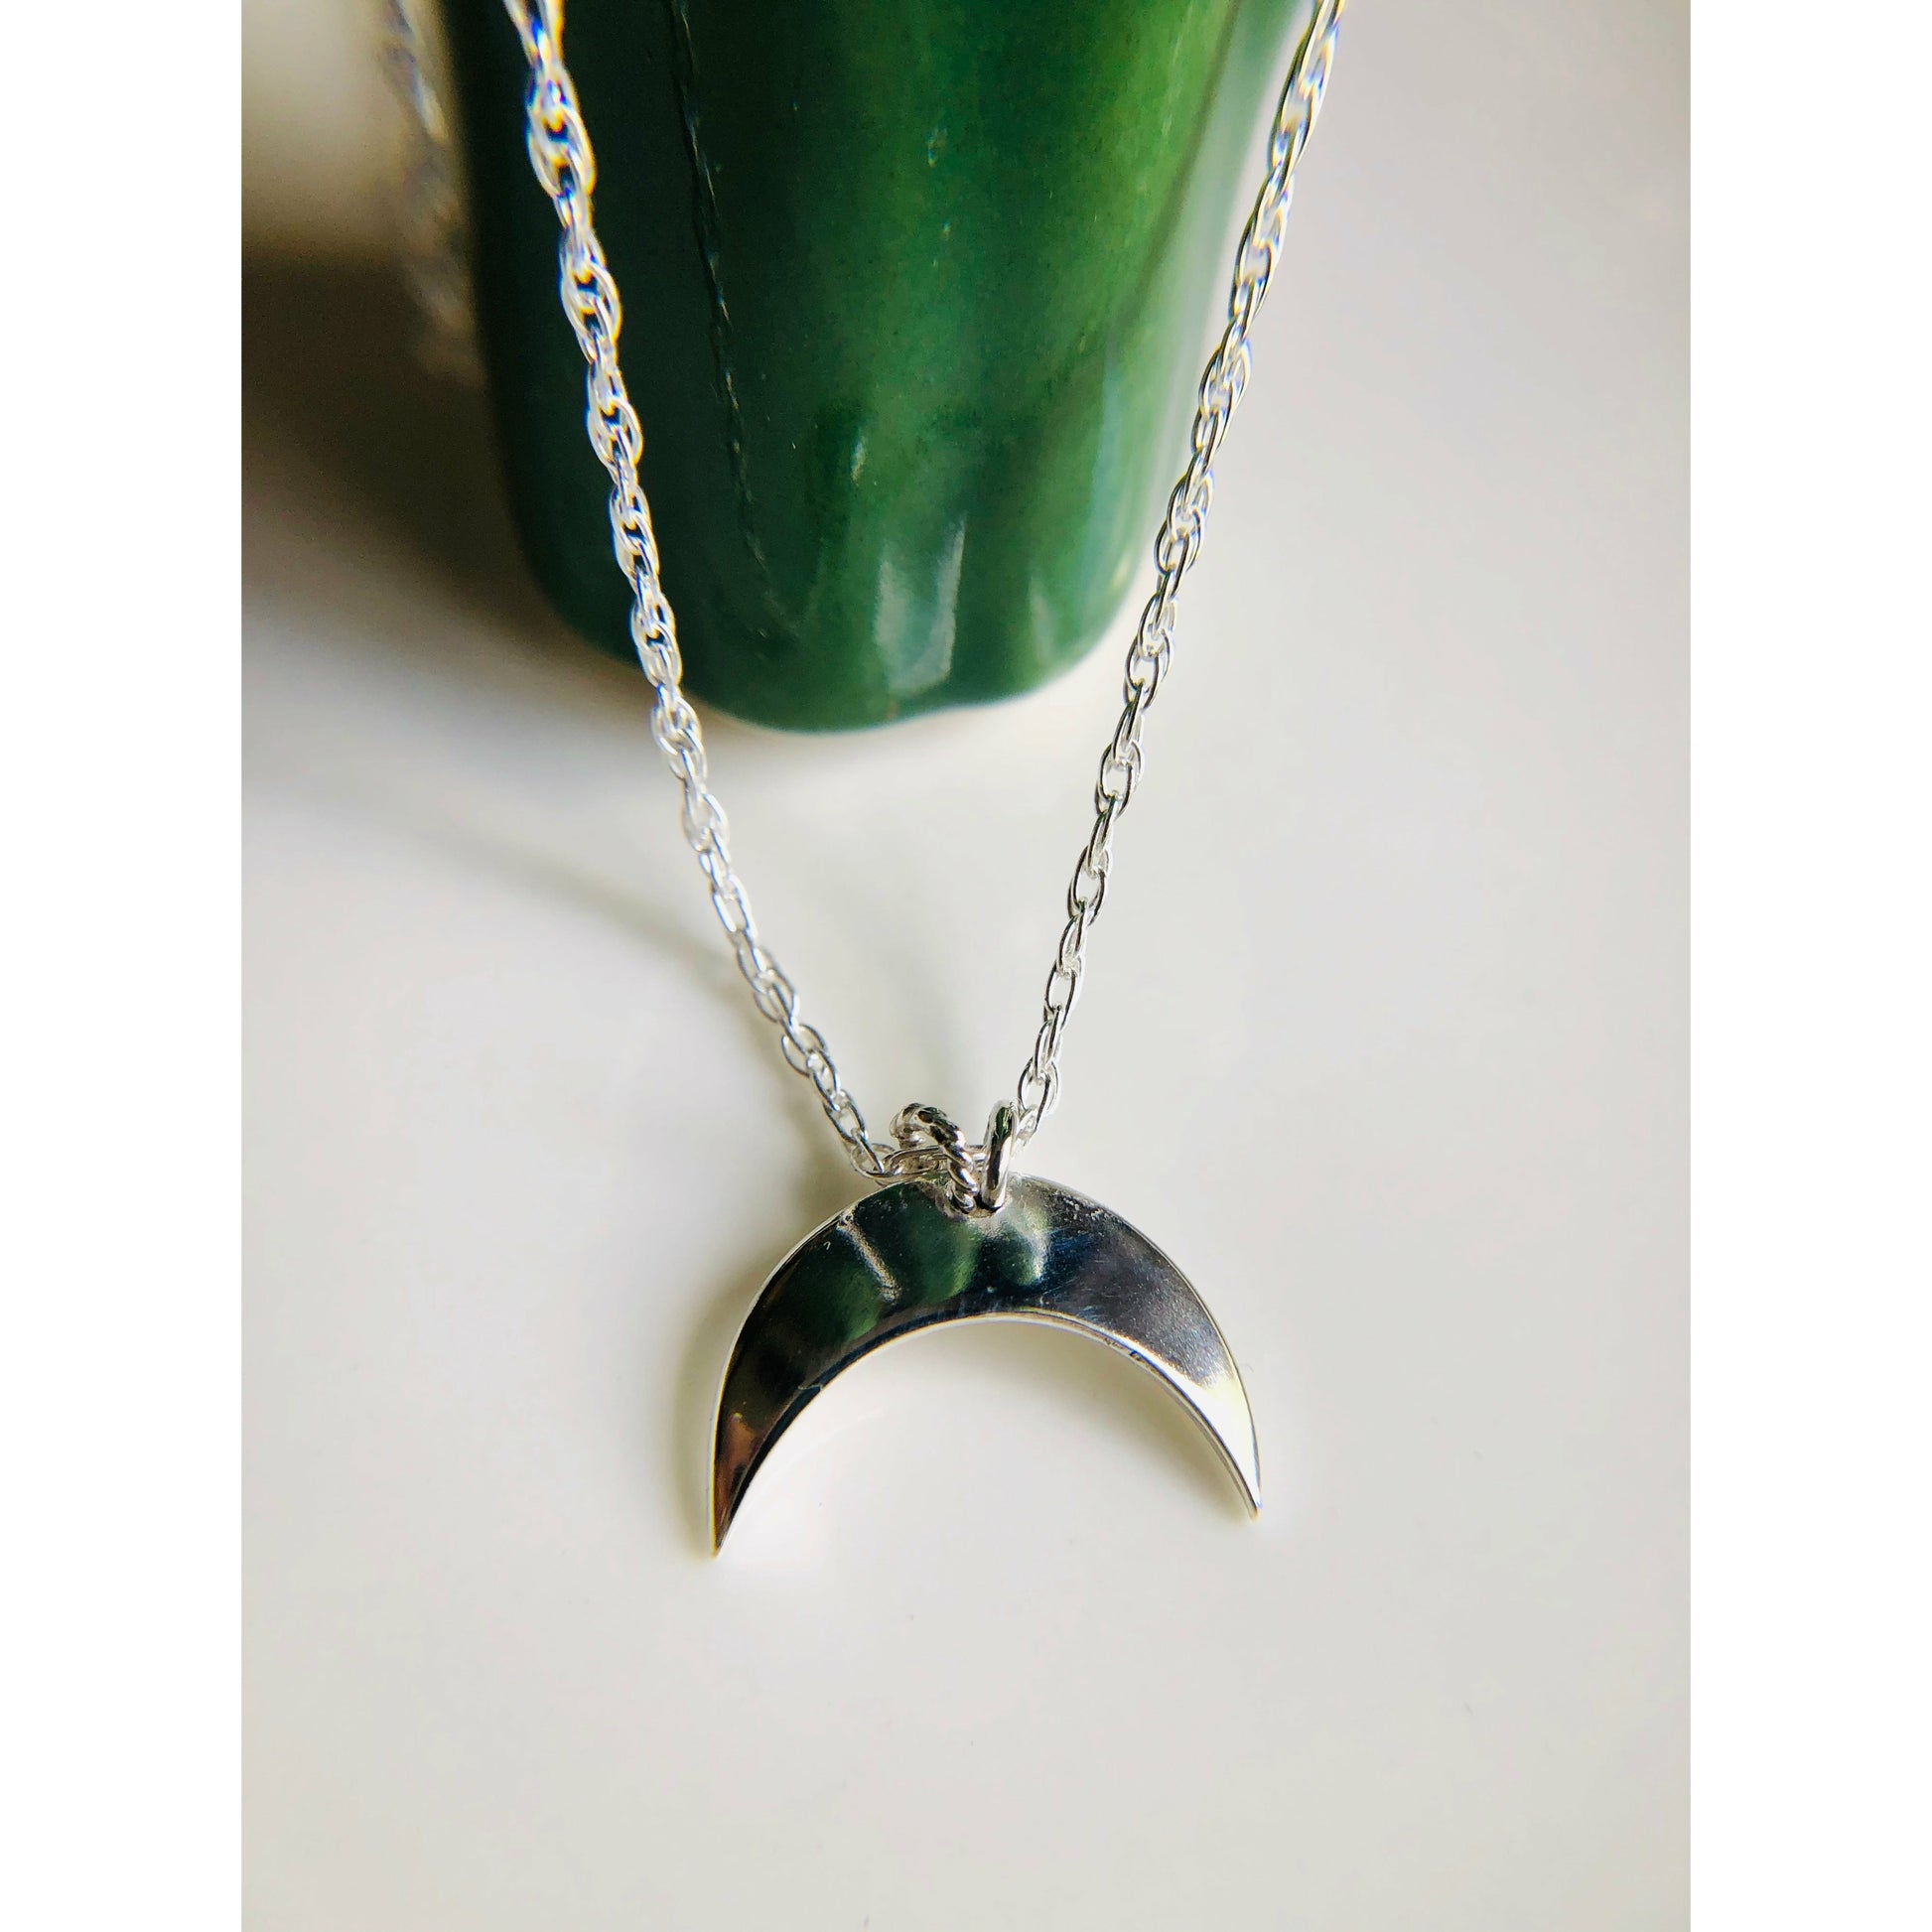 Sterling silver moon shape pointed downward mounted on a stainless steel chain